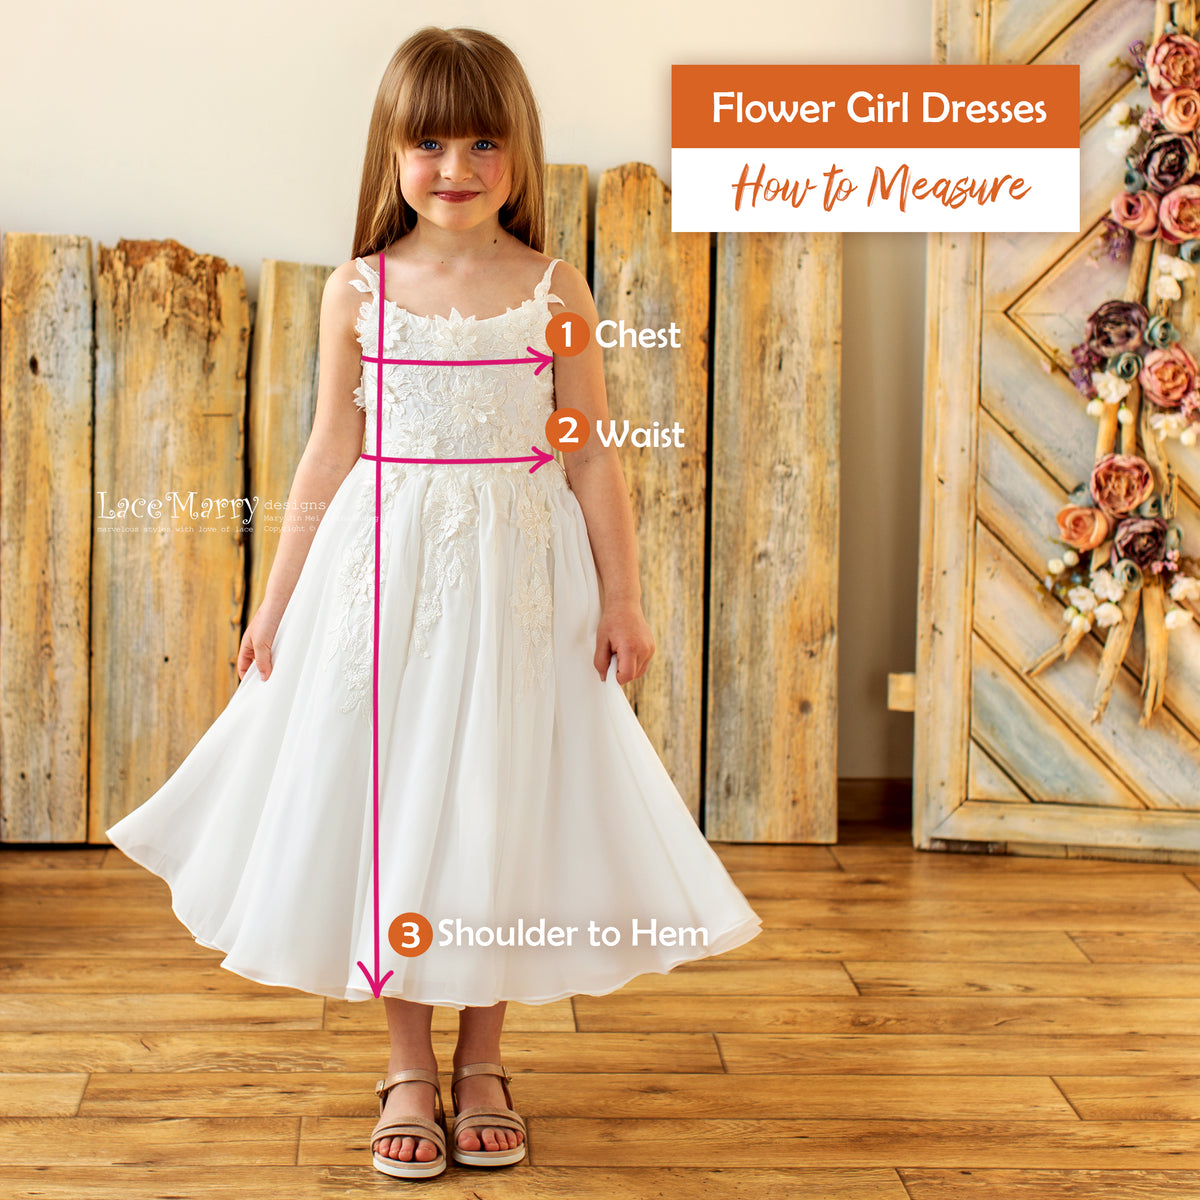 How to Measure a Flower Girl